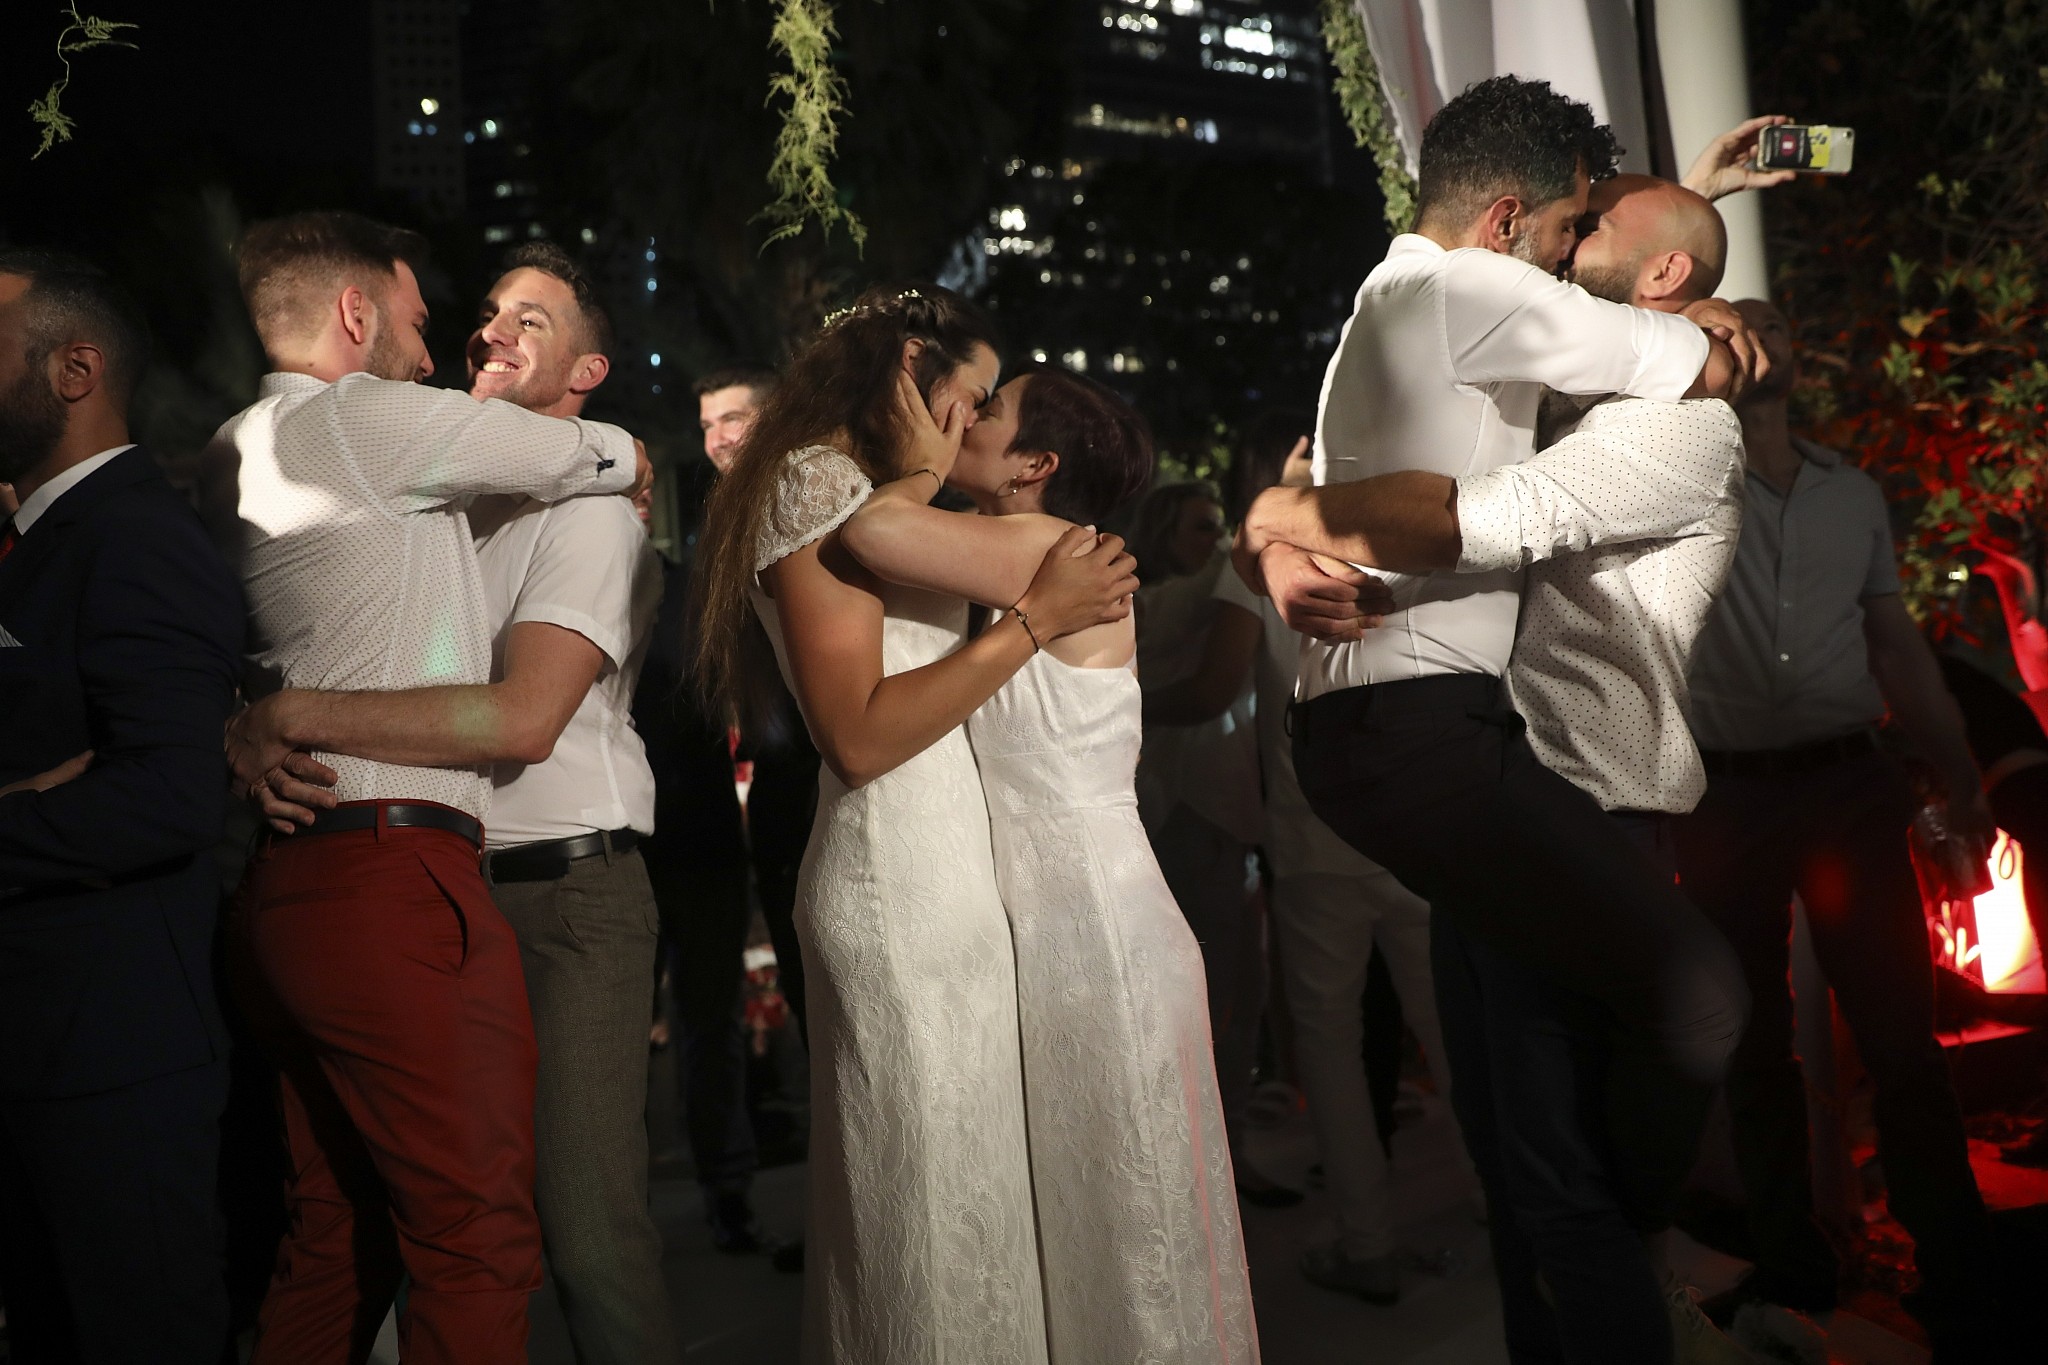 23 couples tie the knot at staged mass wedding to advocate for gay rights The Times of Israel picture picture